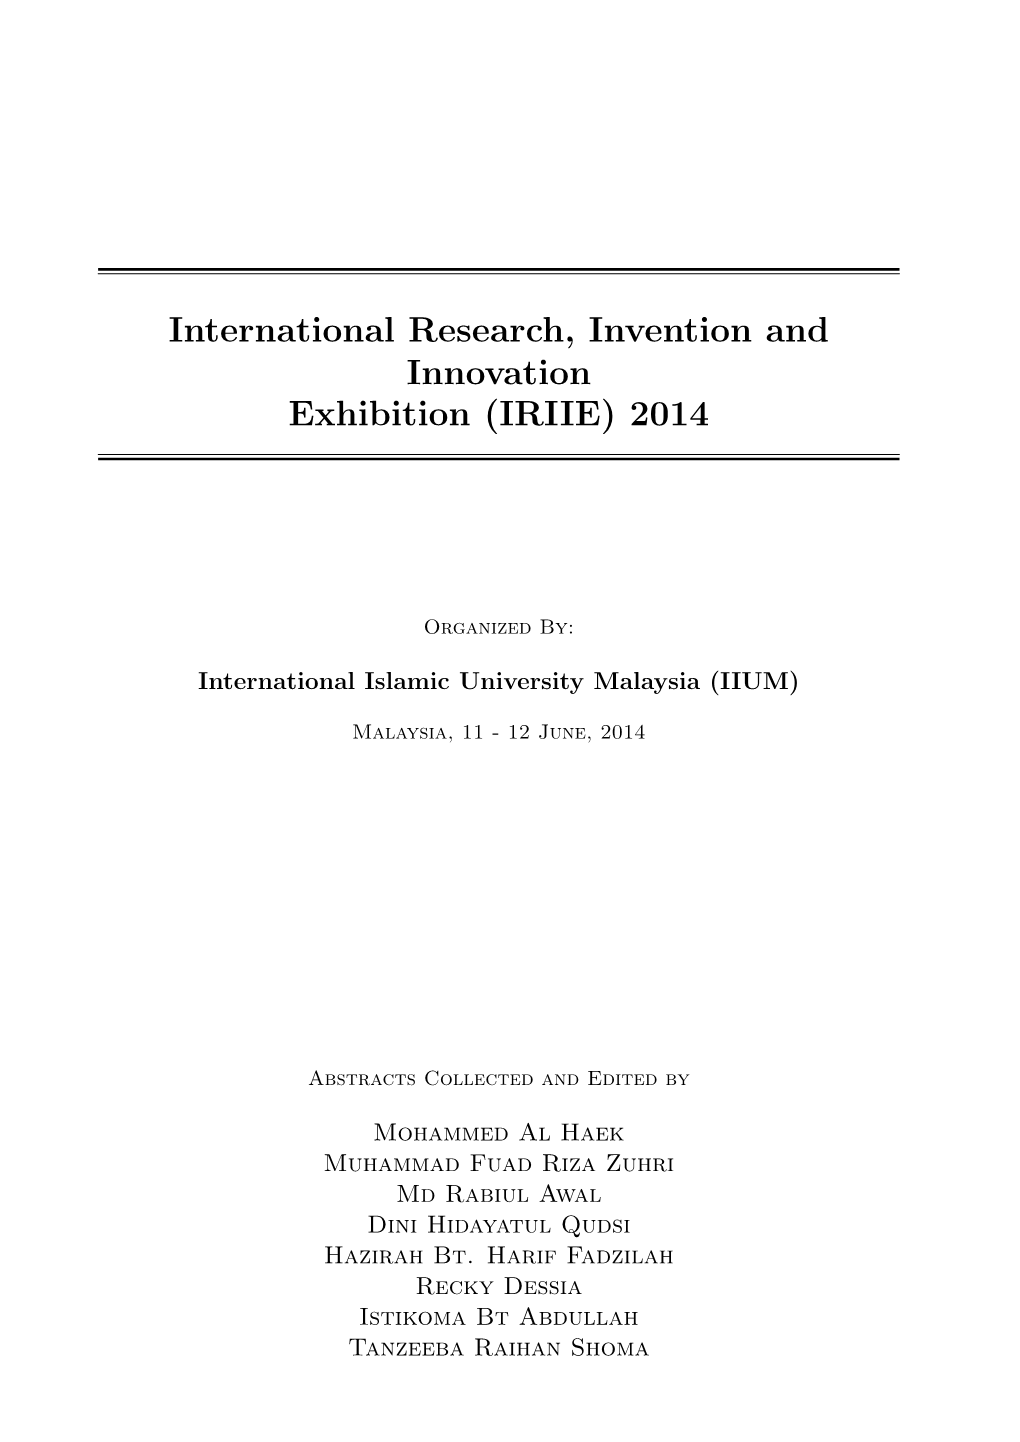 International Research, Invention and Innovation Exhibition (IRIIE) 2014